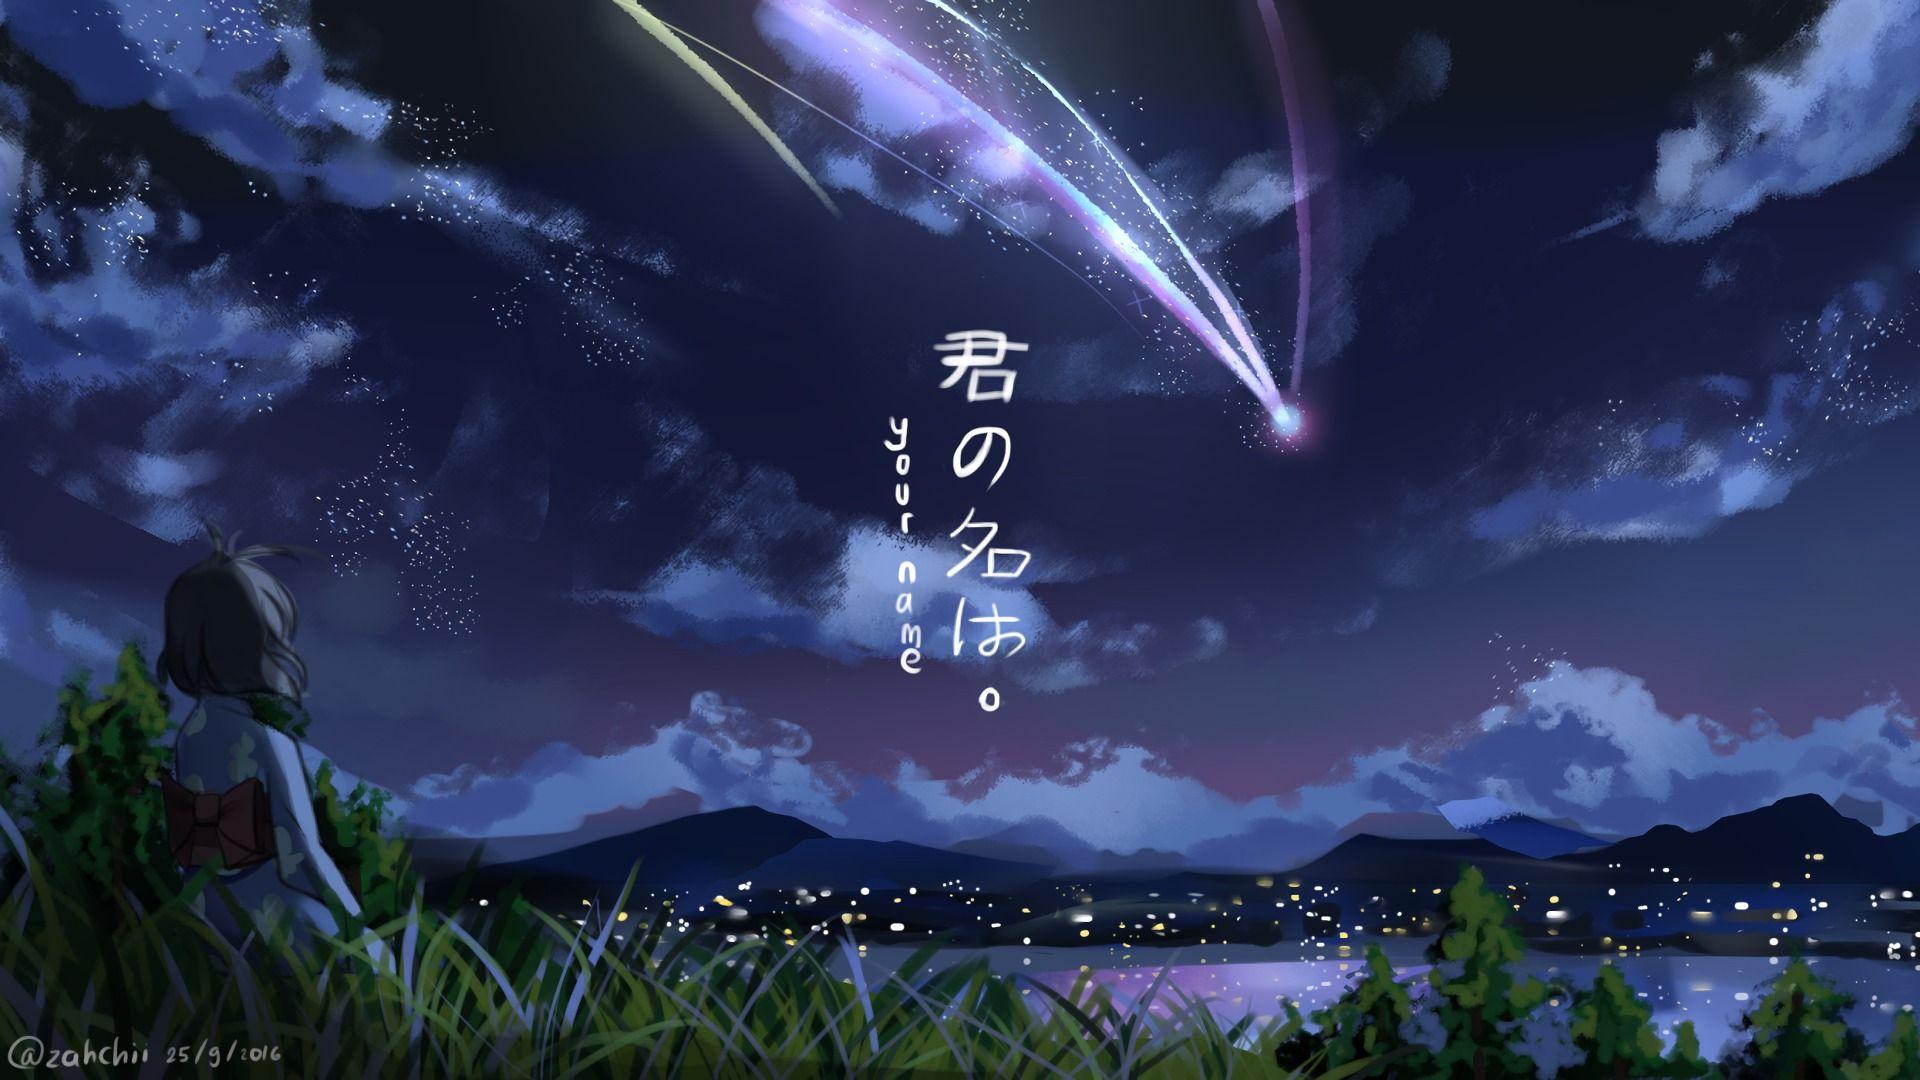 Wallpaper, Anime, Your Name. (・ω・)ノ